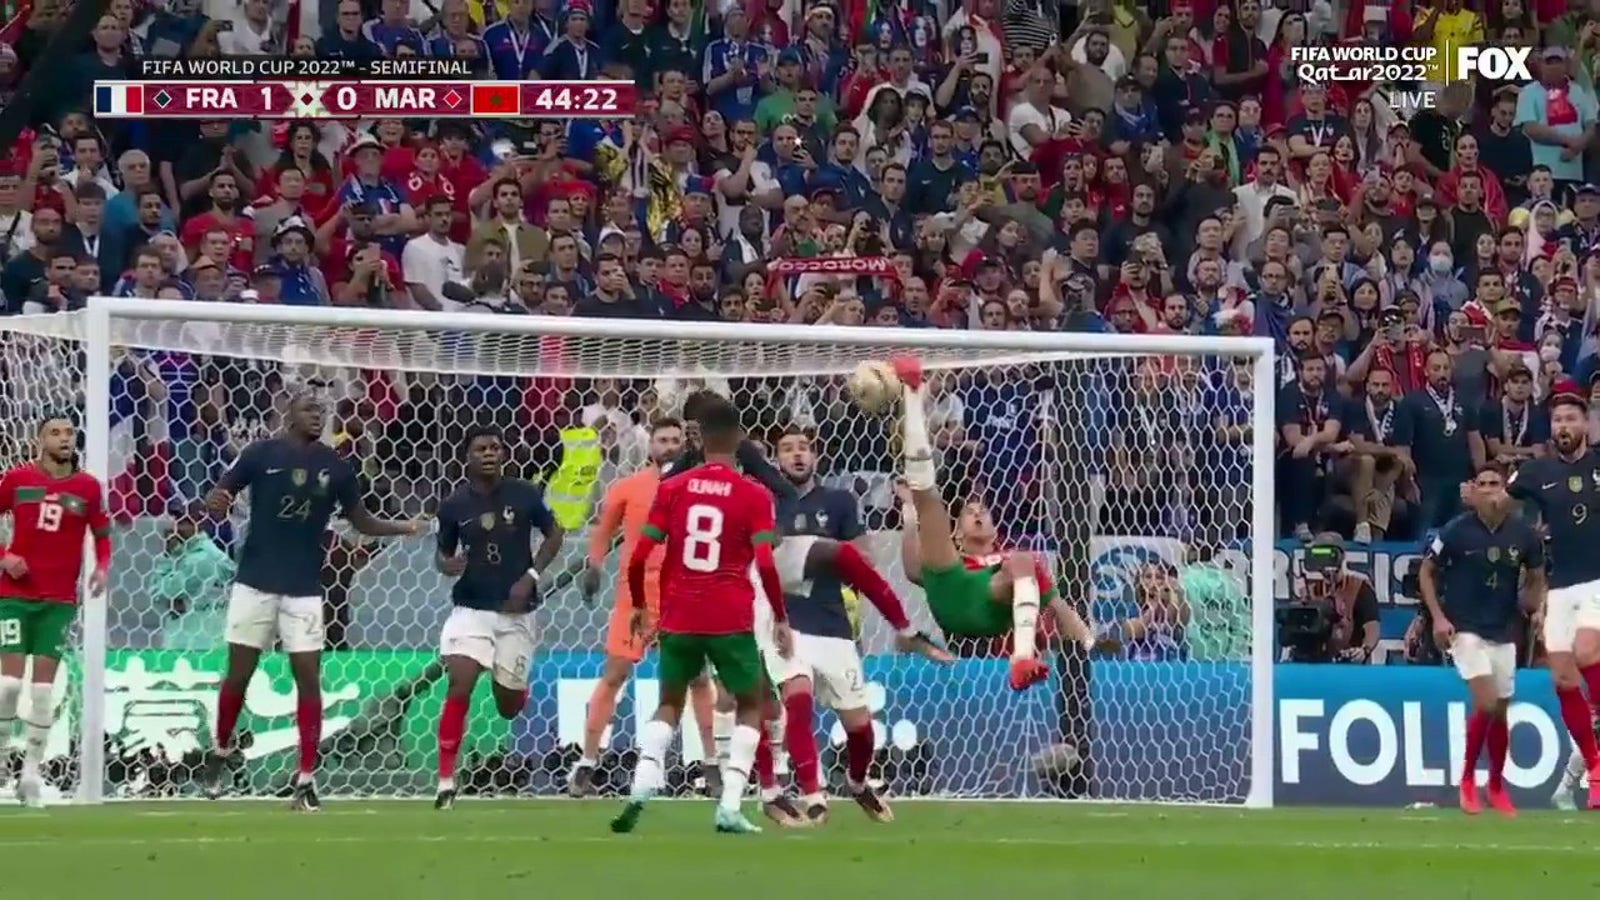 Morocco's Jawad El Yamiq's bicycle kick ALMOST goes in but France's Hugo Lloris denies it 